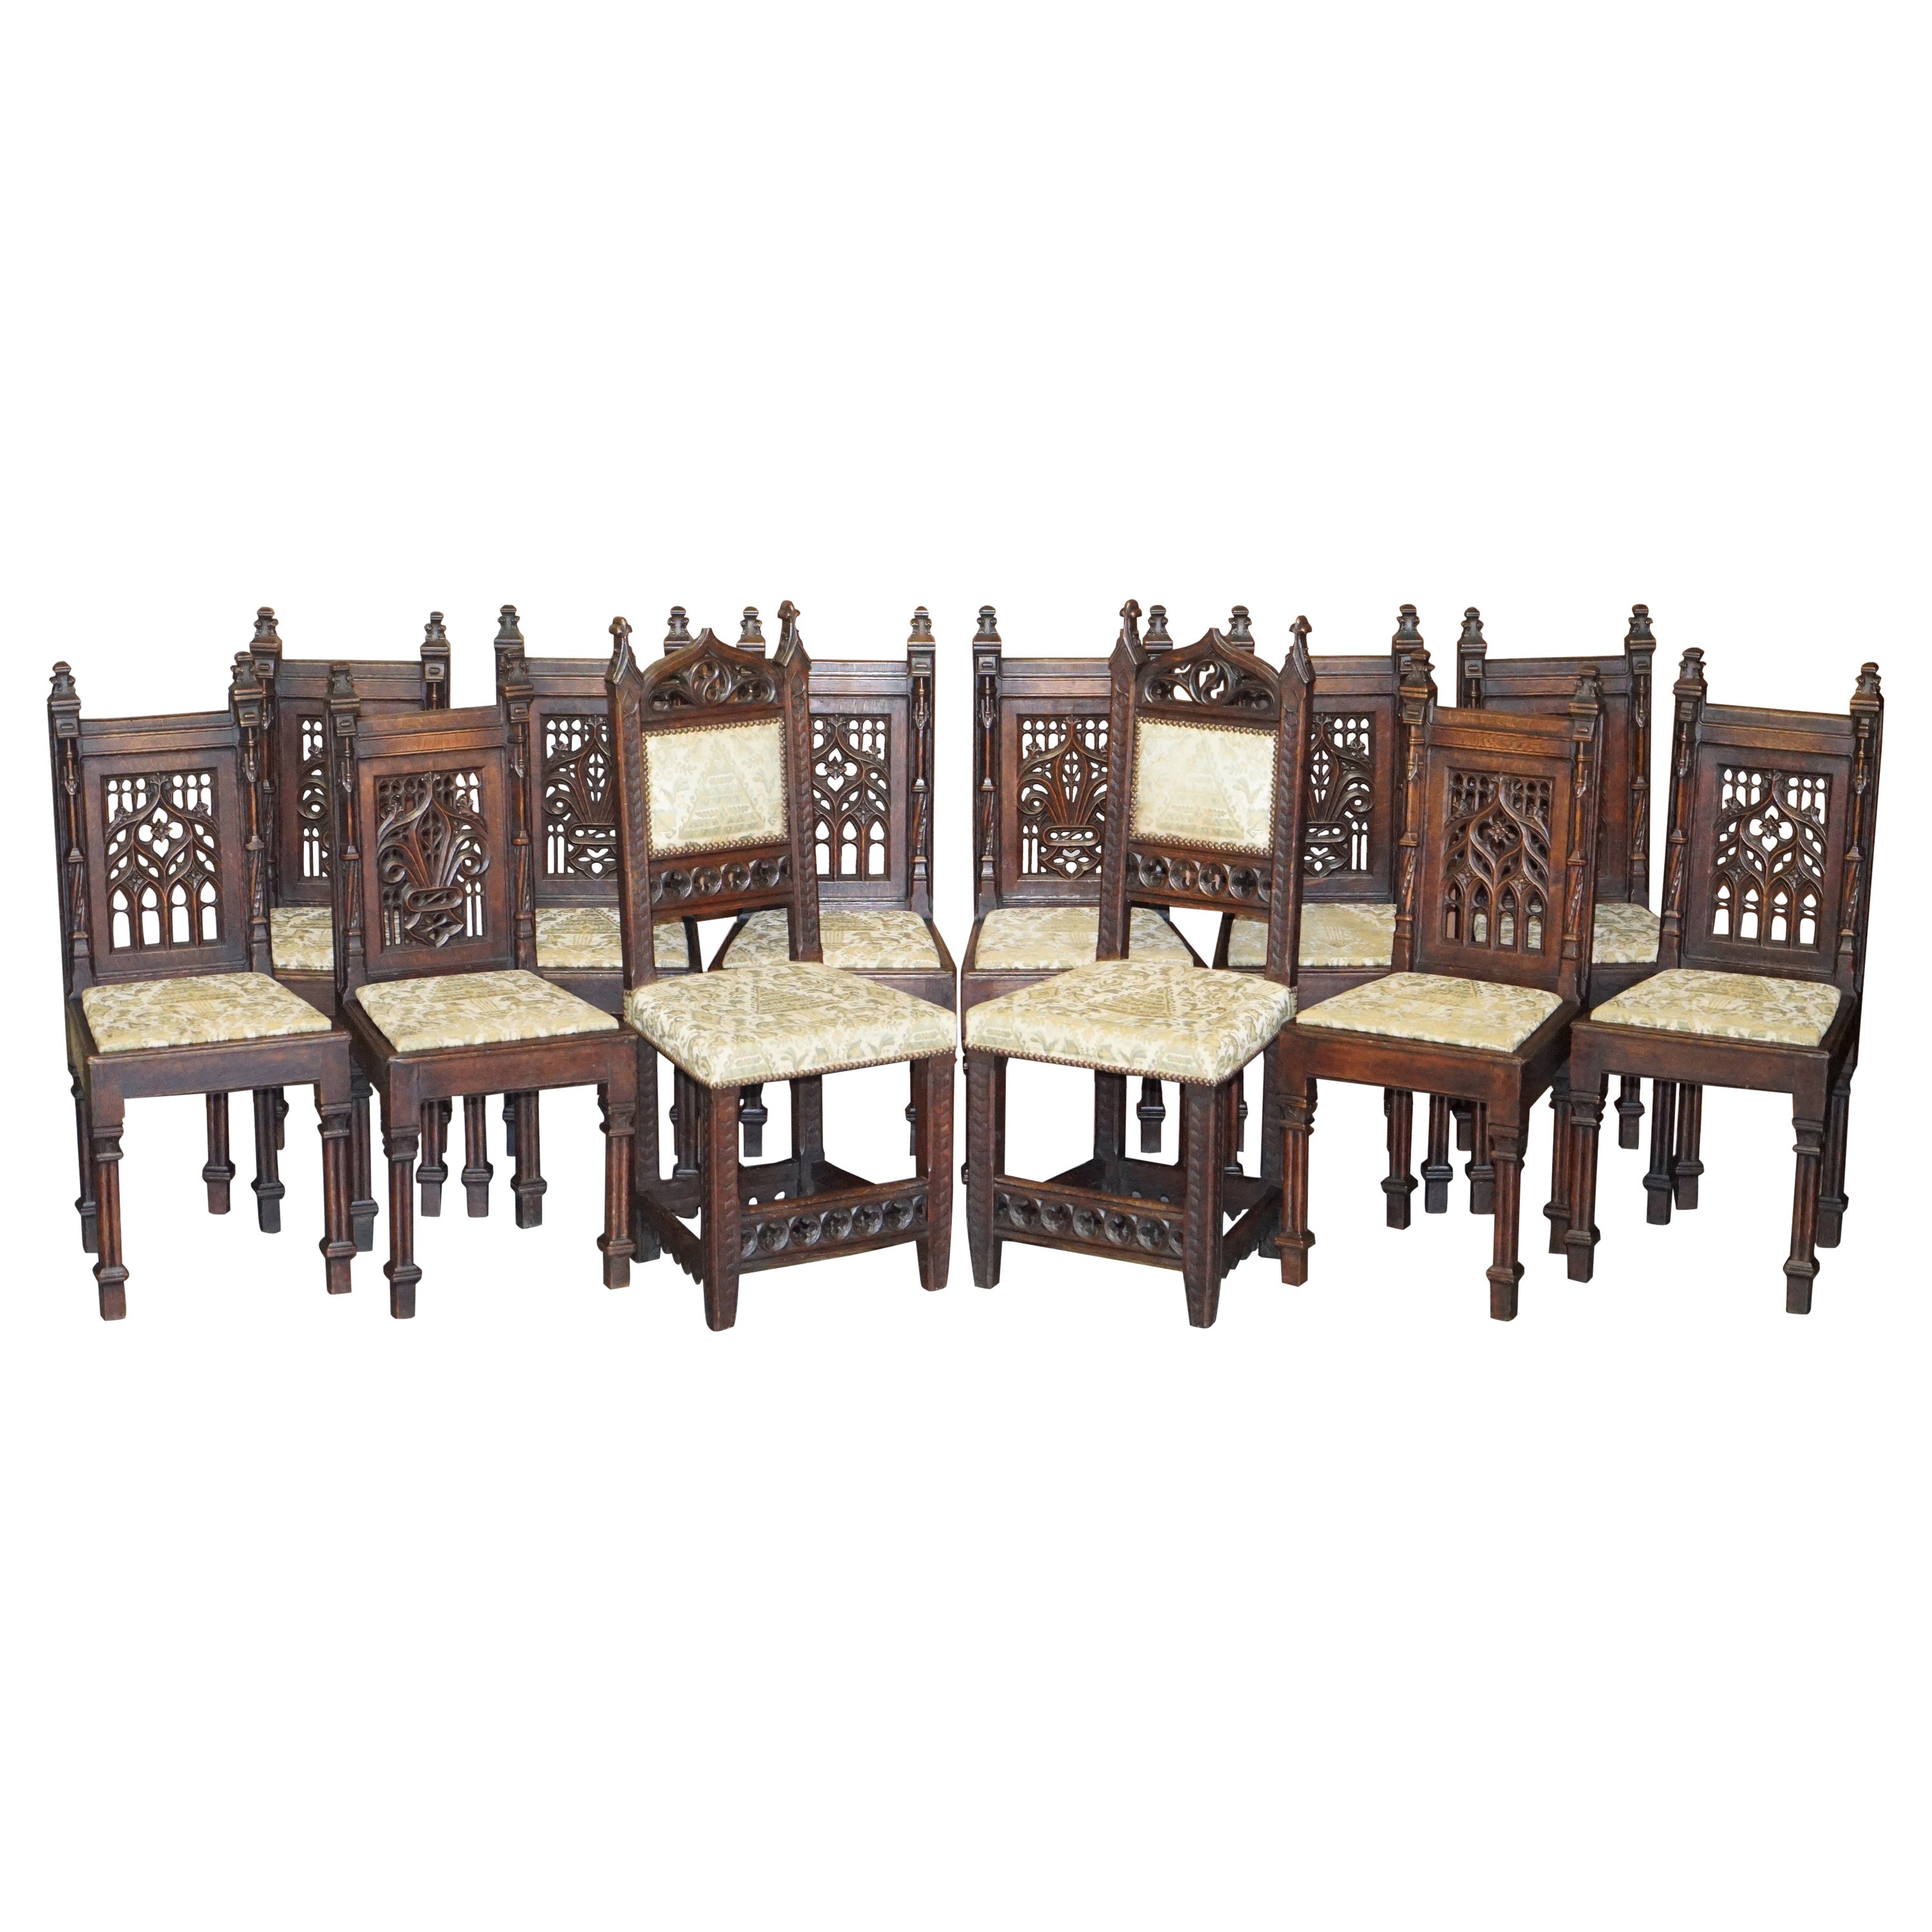 Twelve Antique circa 1800 French Gothic Revival French Dining Chairs Very Fine